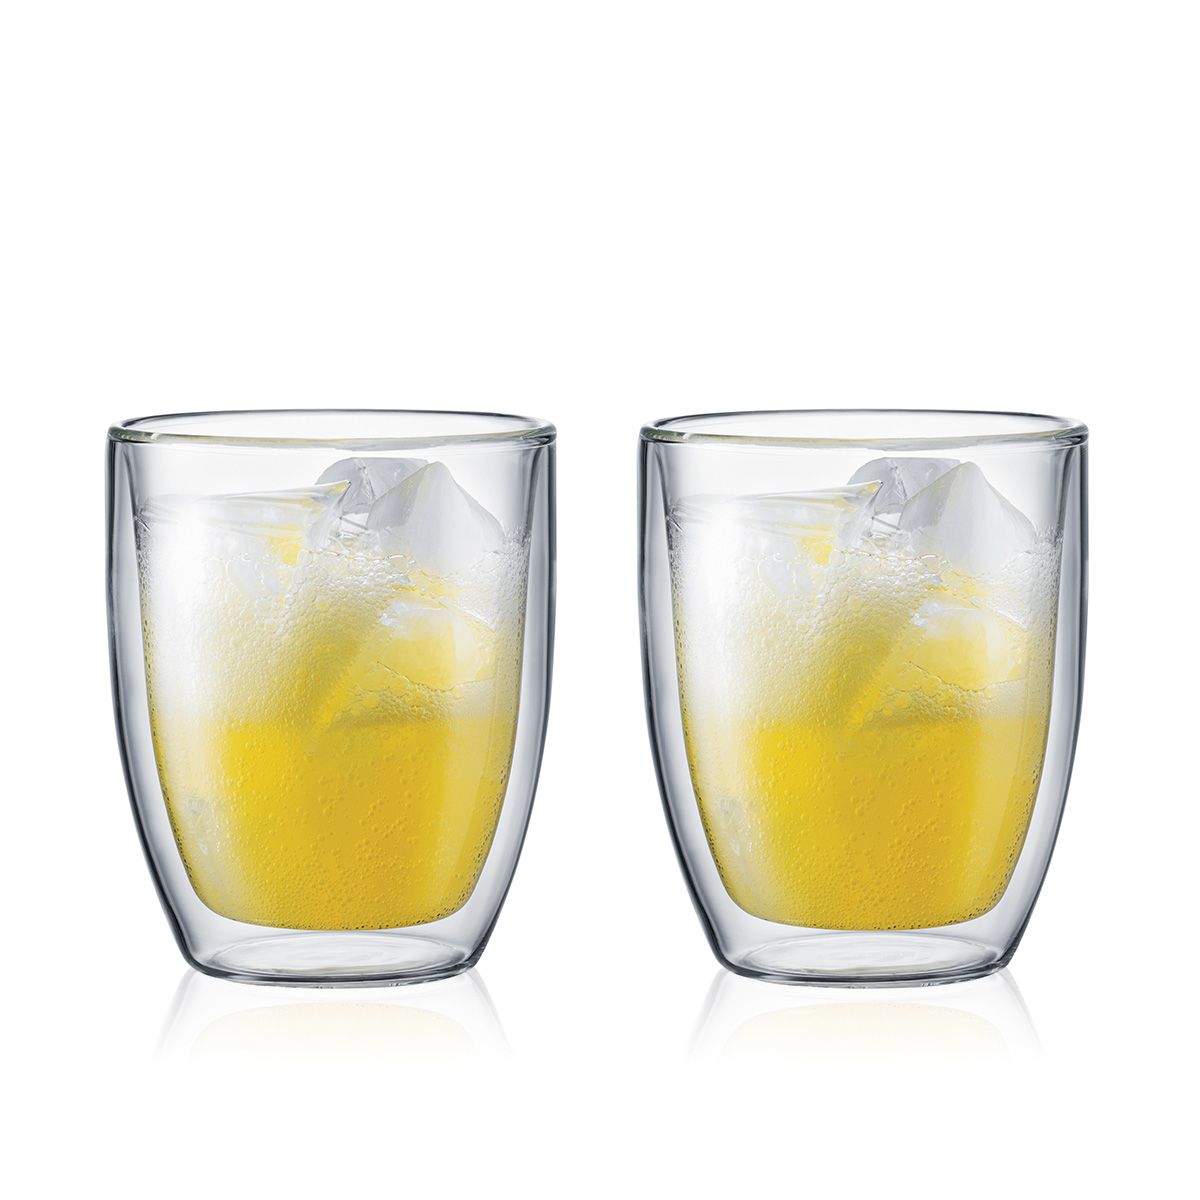 bodum Bistro Double Wall Thermo Glass 4 pack $25.99 : r/Costco